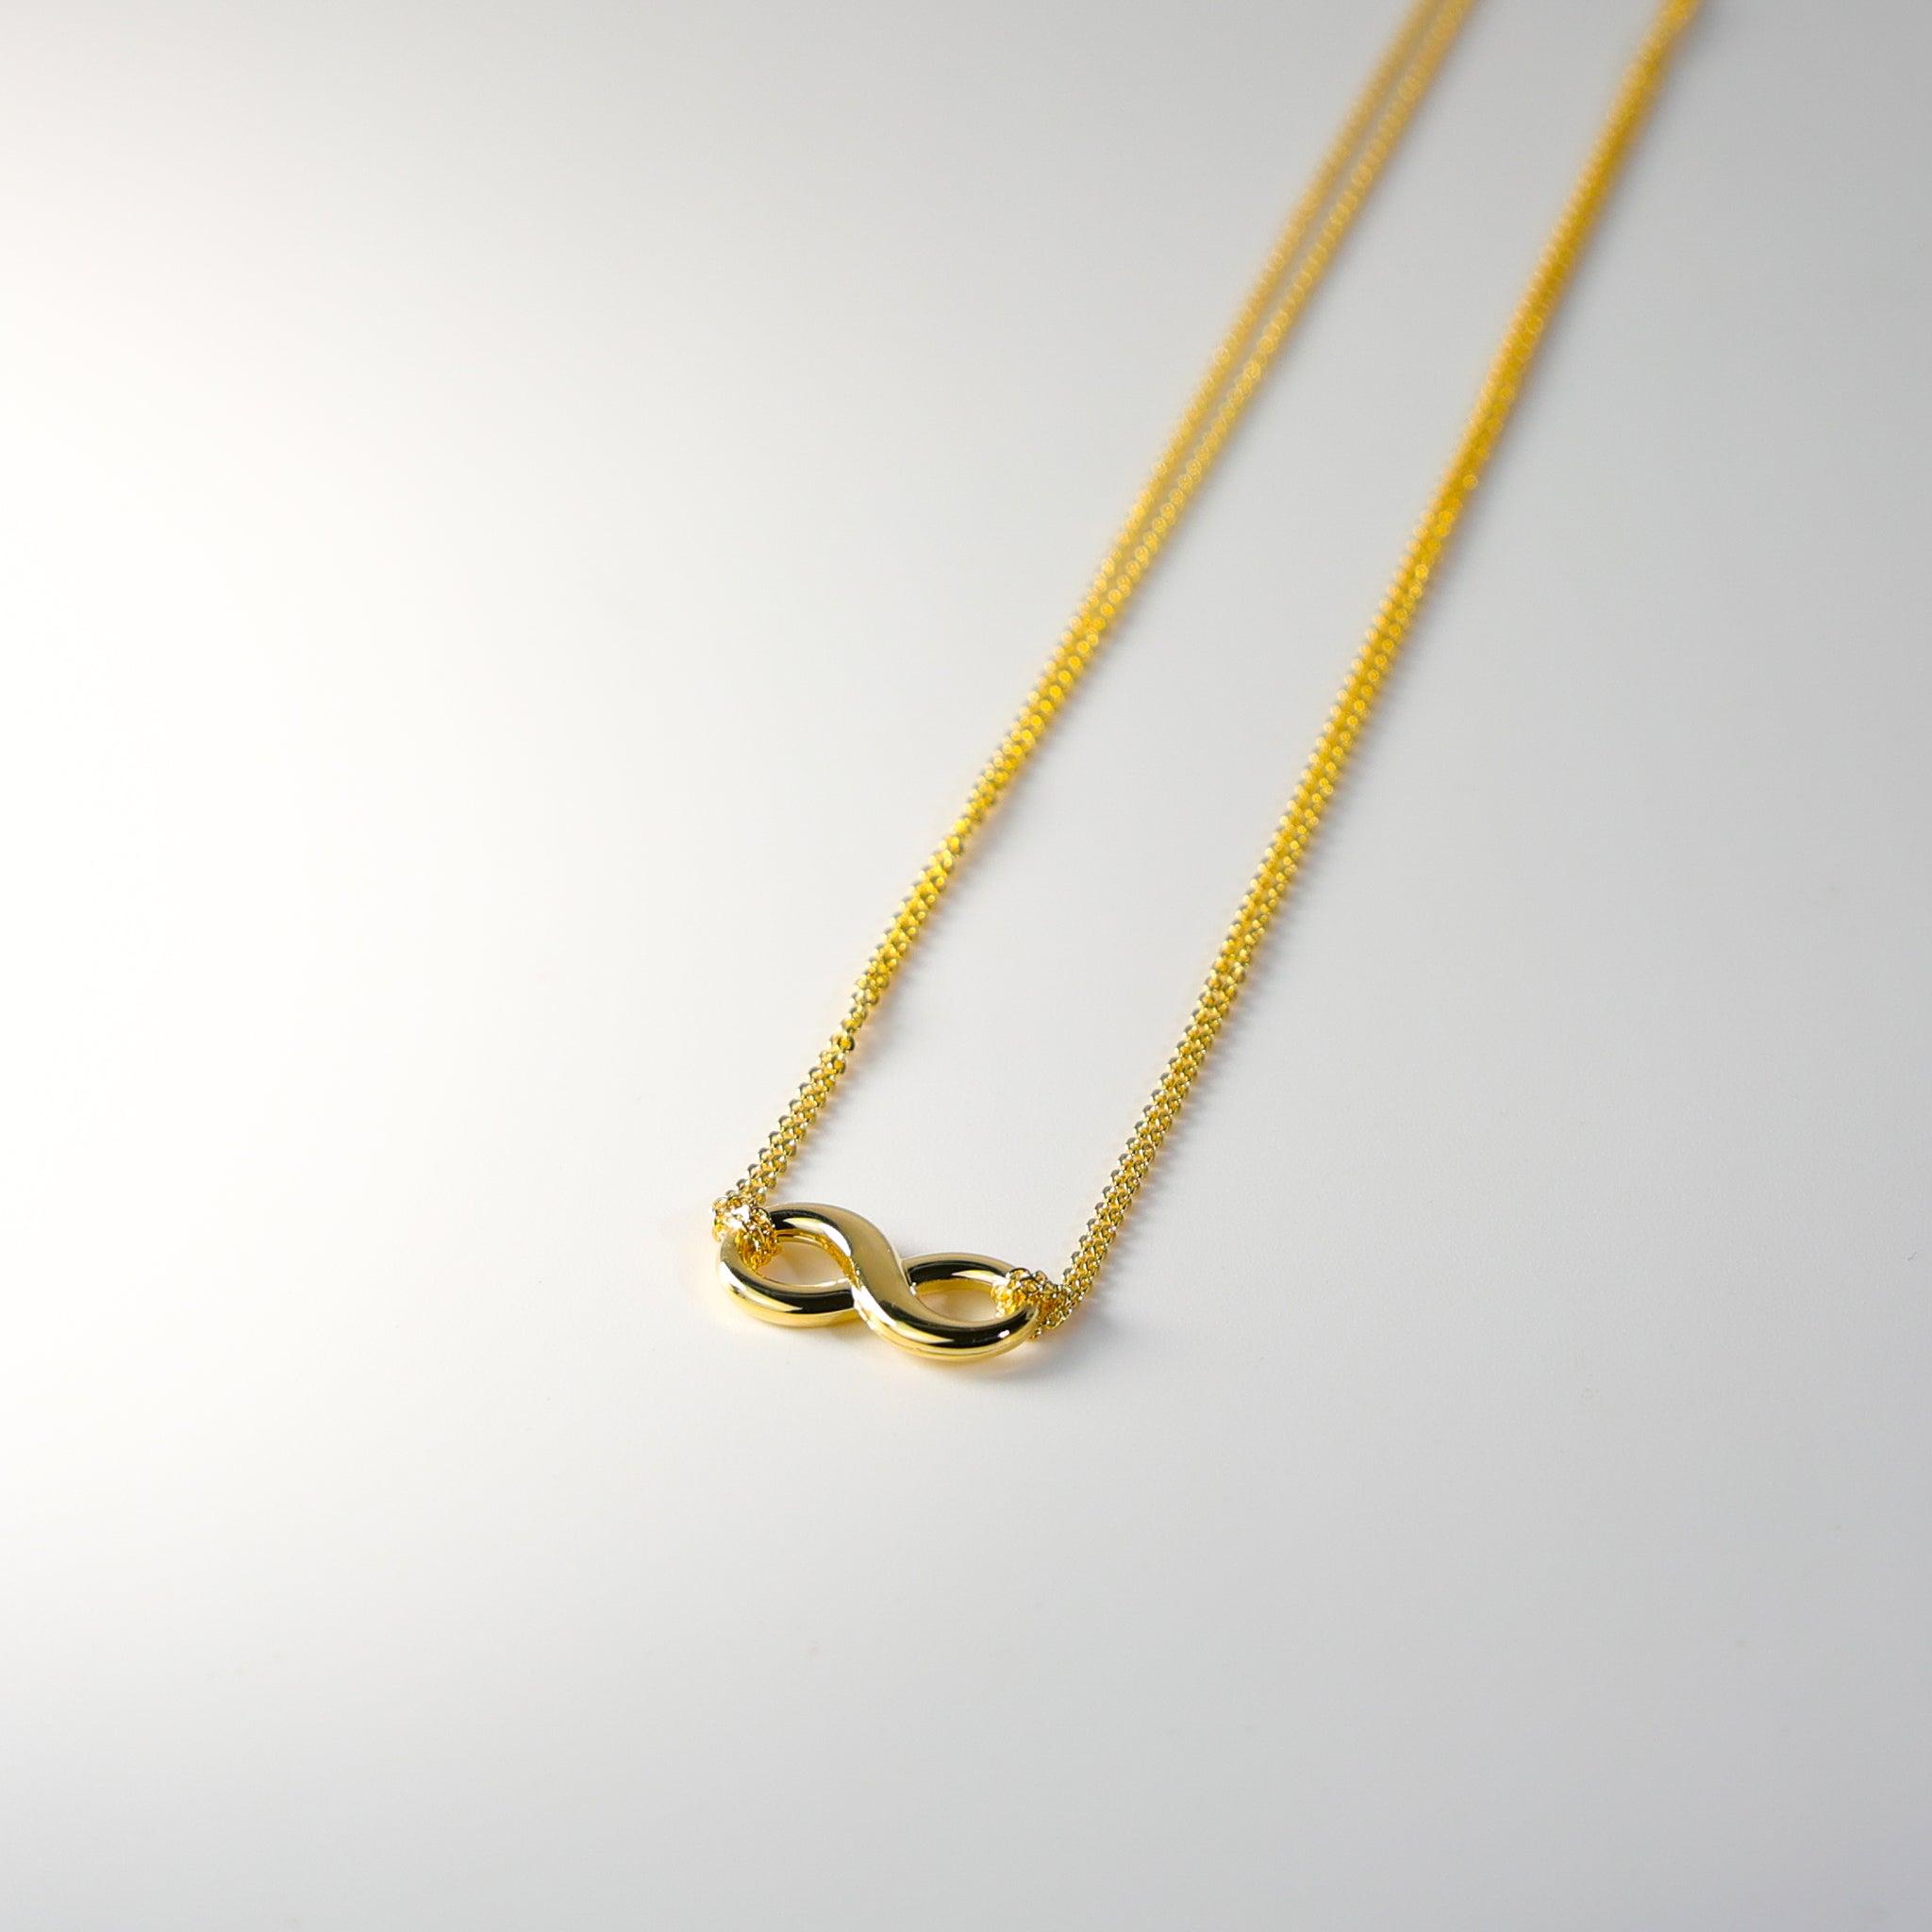 Gold Infinity Necklace Model-NK0148 - Charlie & Co. Jewelry